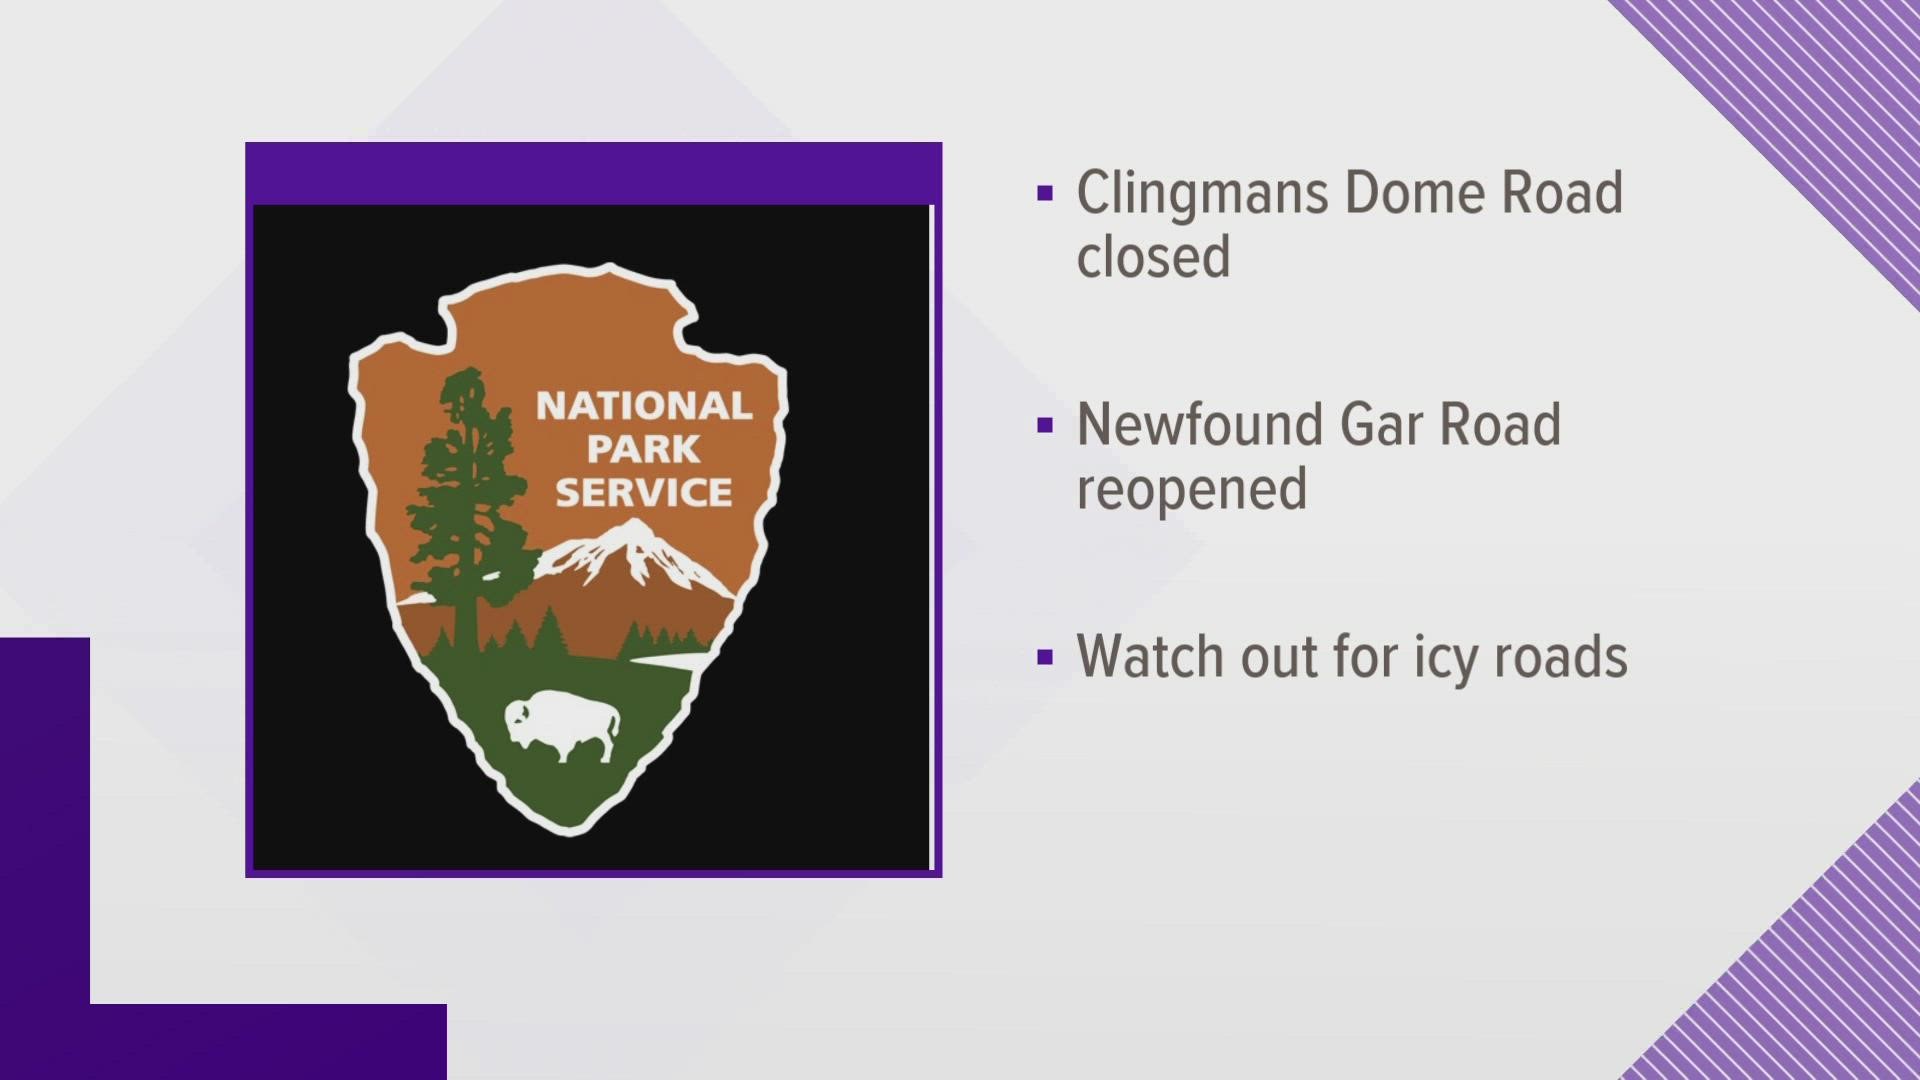 A heads up for drivers heading to the Smokies, the National Park Service said in a tweet that Clingmans Dome Road is closed due to ice and snow.